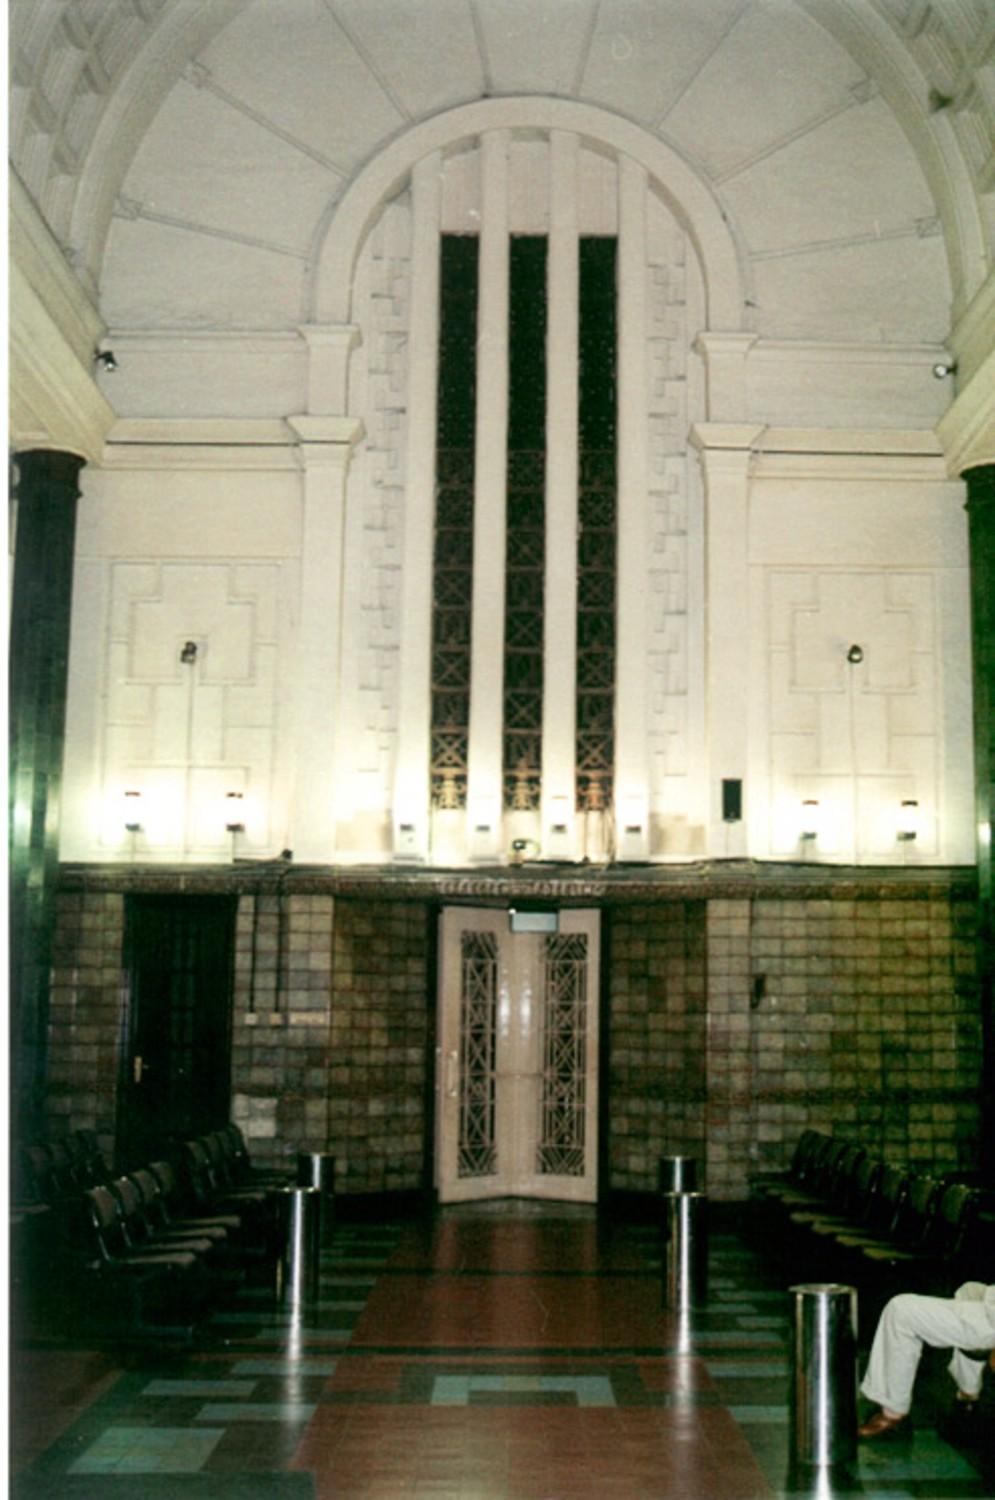 Before : The Main Lobby of the building. Some ceramics are missing and broken. The arch ceiling is original from the 1935.